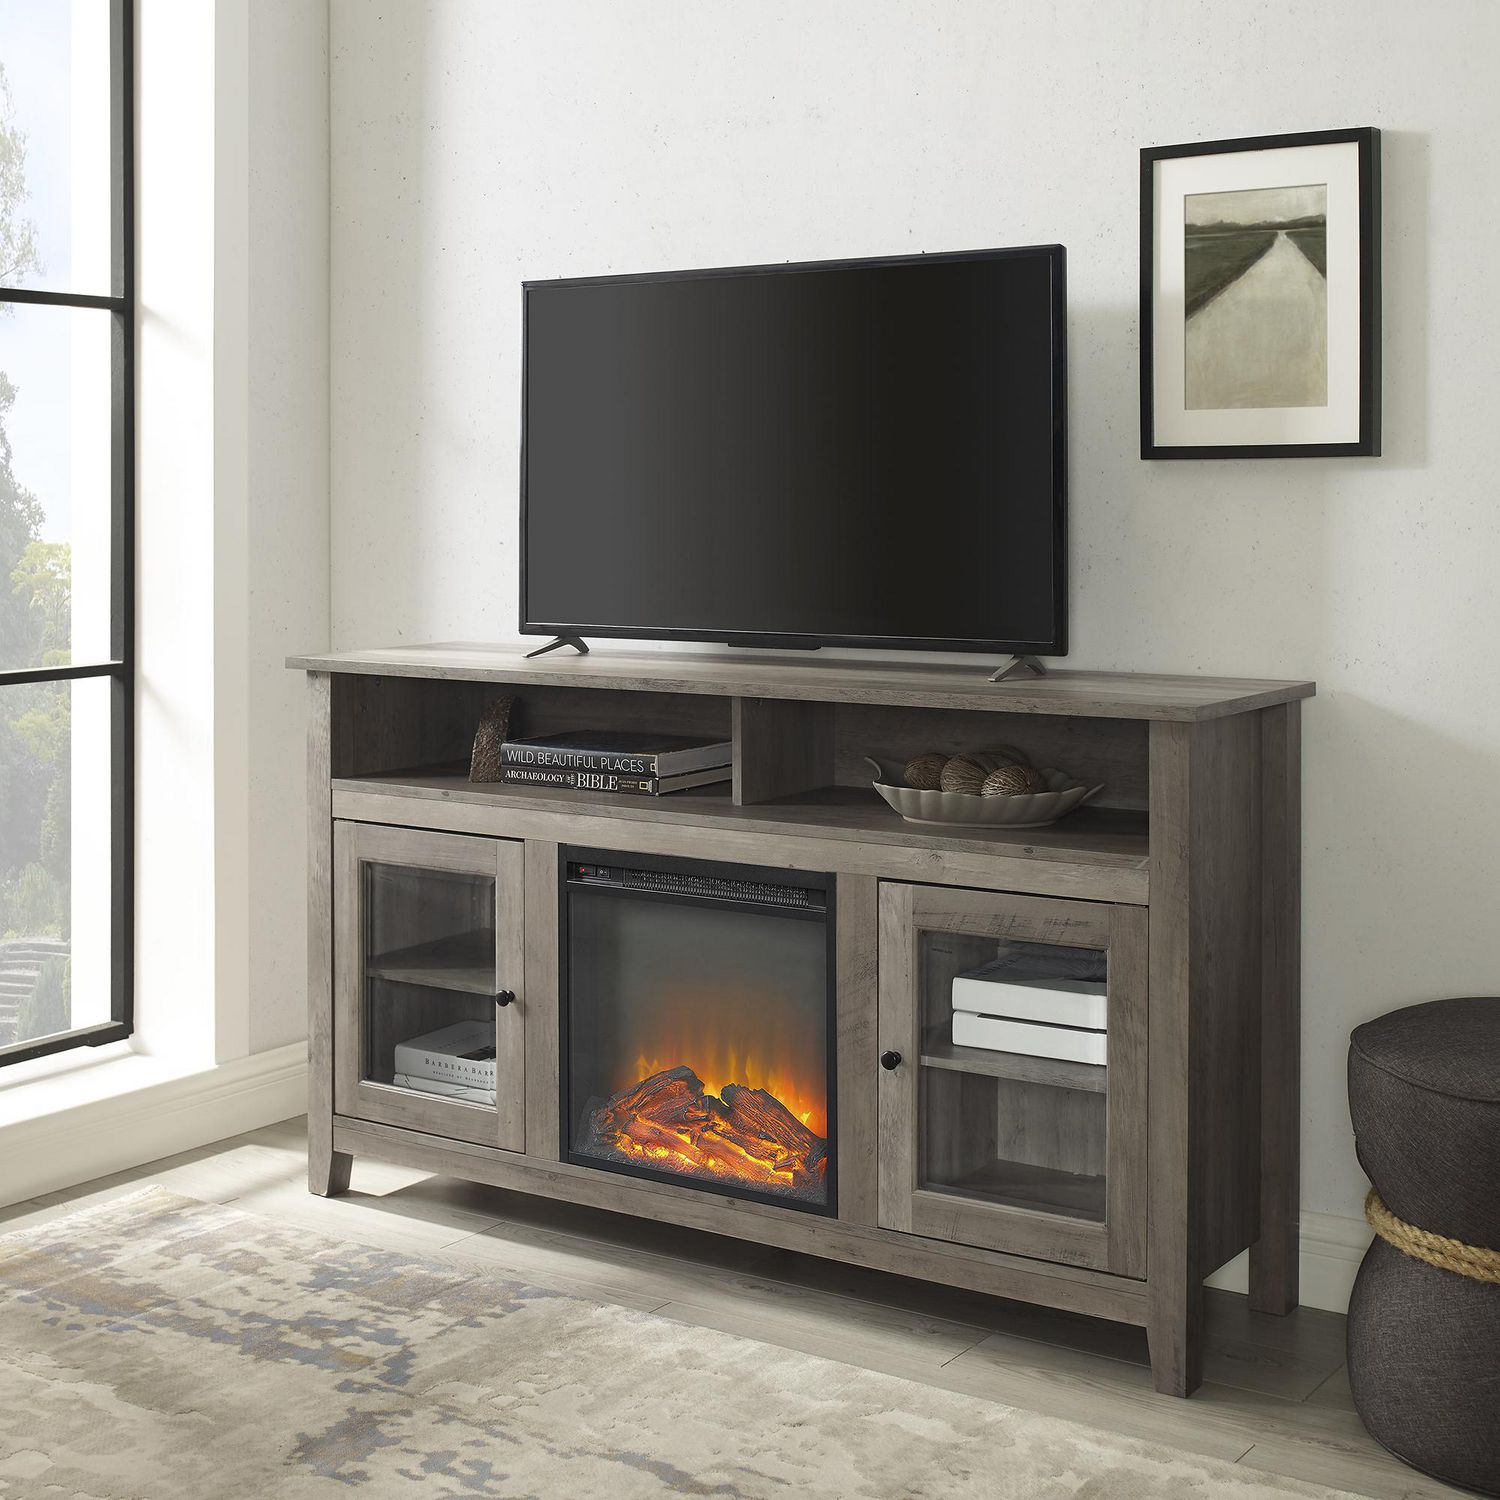 Tall Rustic Fireplace Tv Stand For S, Tv Stand With Fireplace Canada